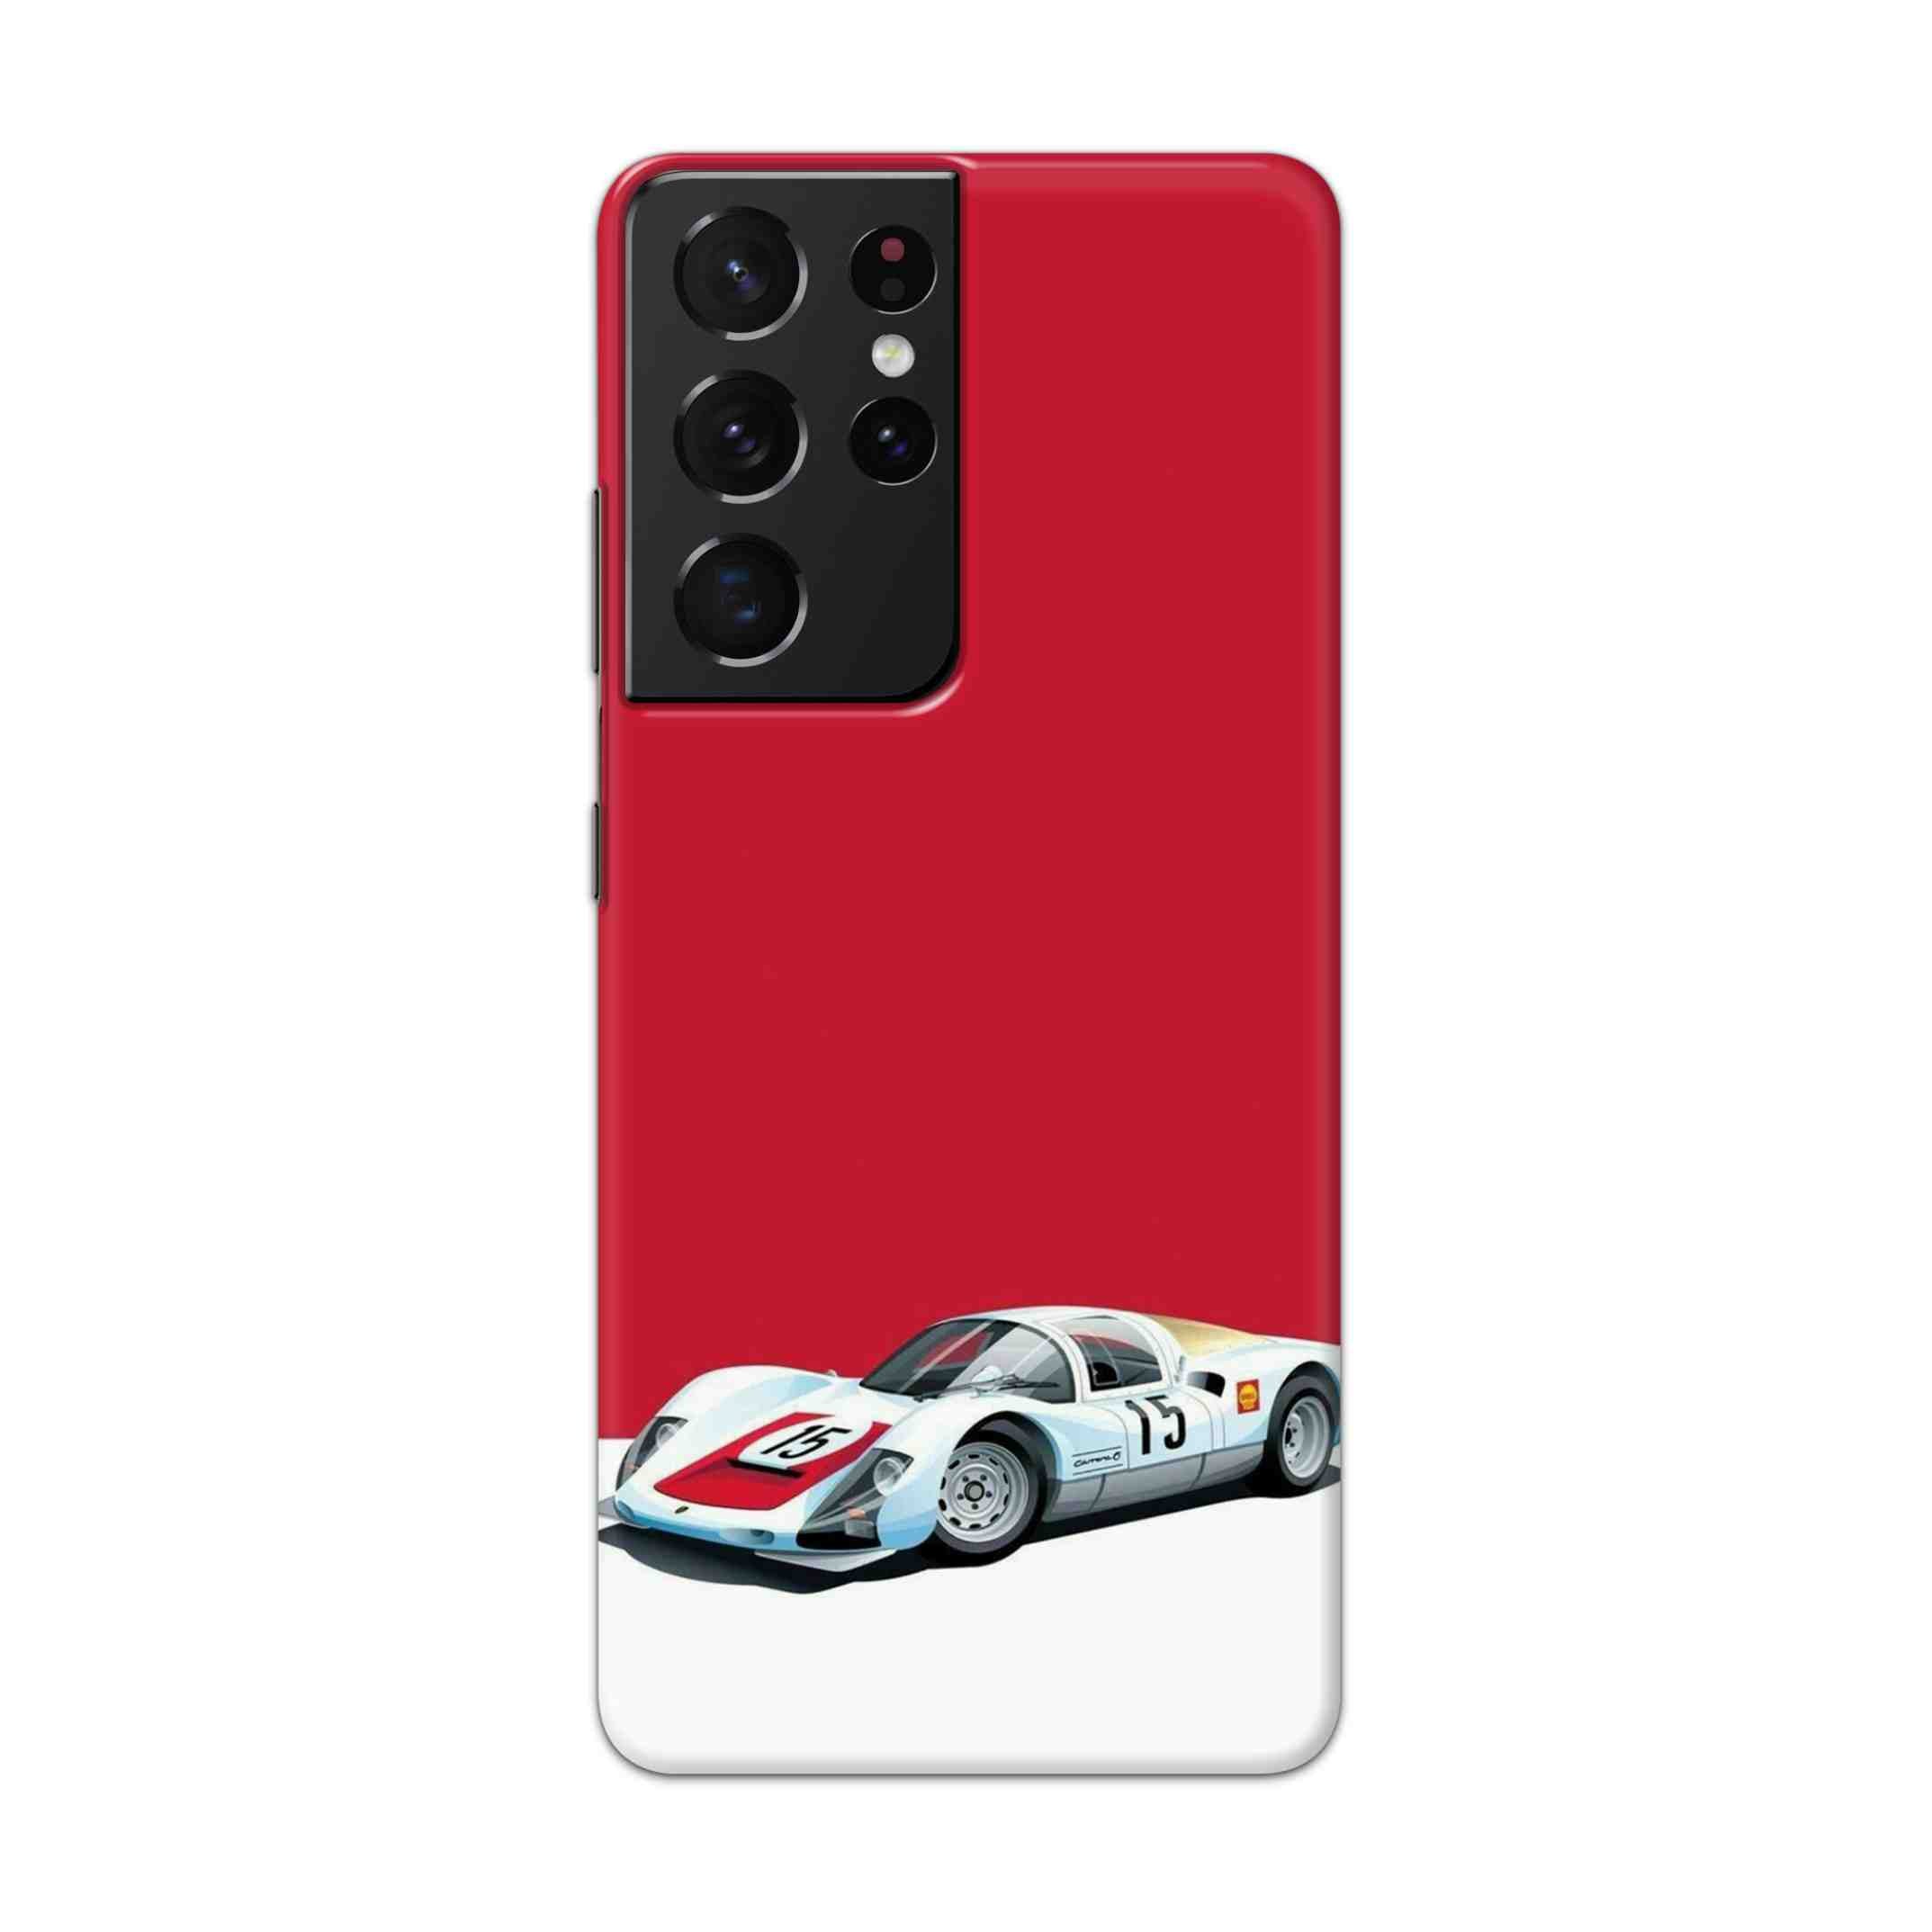 Buy Ferrari F15 Hard Back Mobile Phone Case Cover For Samsung Galaxy S21 Ultra Online